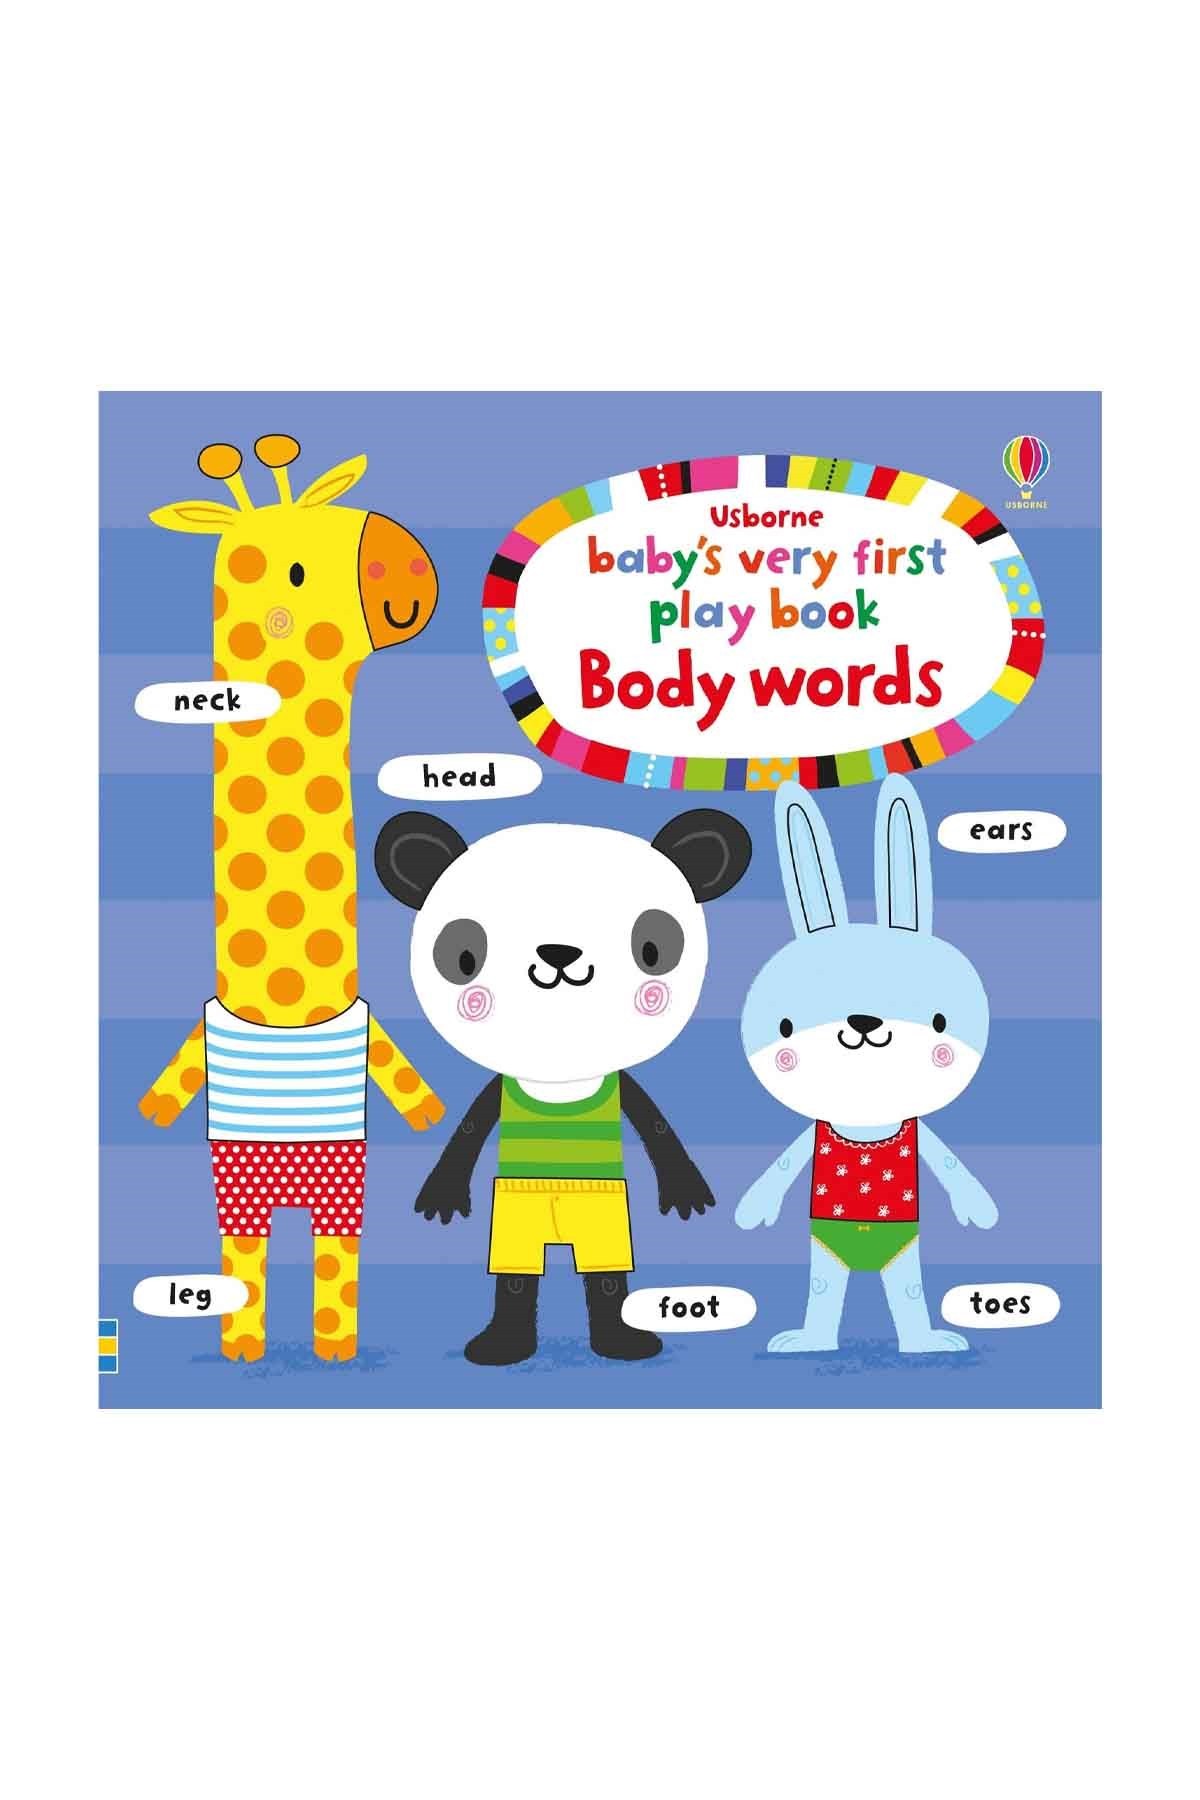 The Usborne Baby's Very First Play Book Body Words